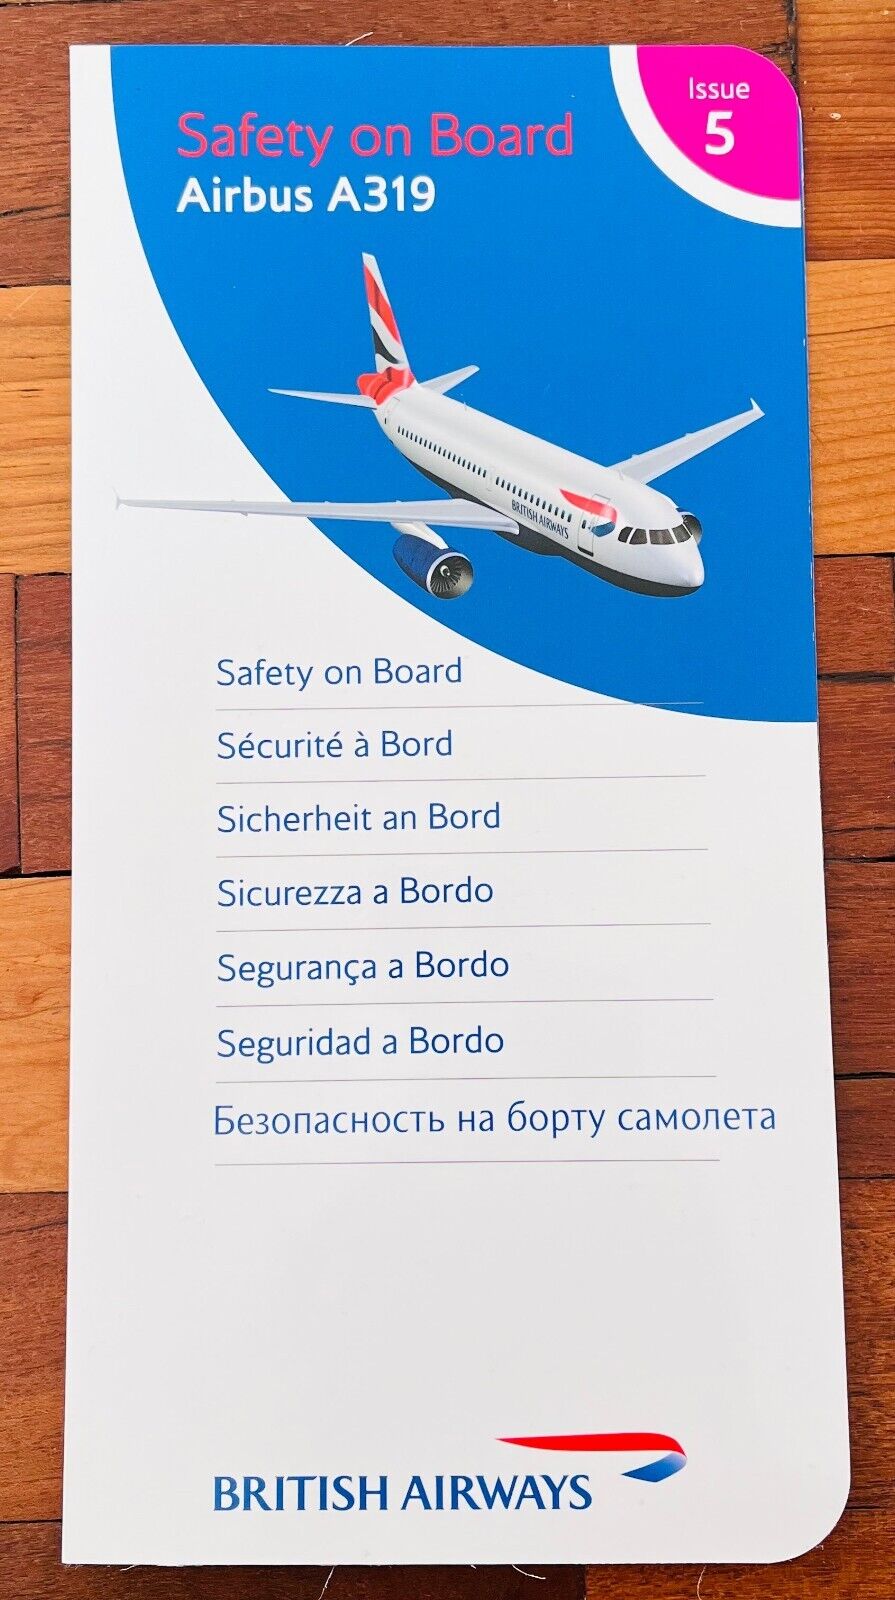 BRITISH AIRWAYS Airbus A319 Airline Safety Card Instructions - Issue 5, 2005